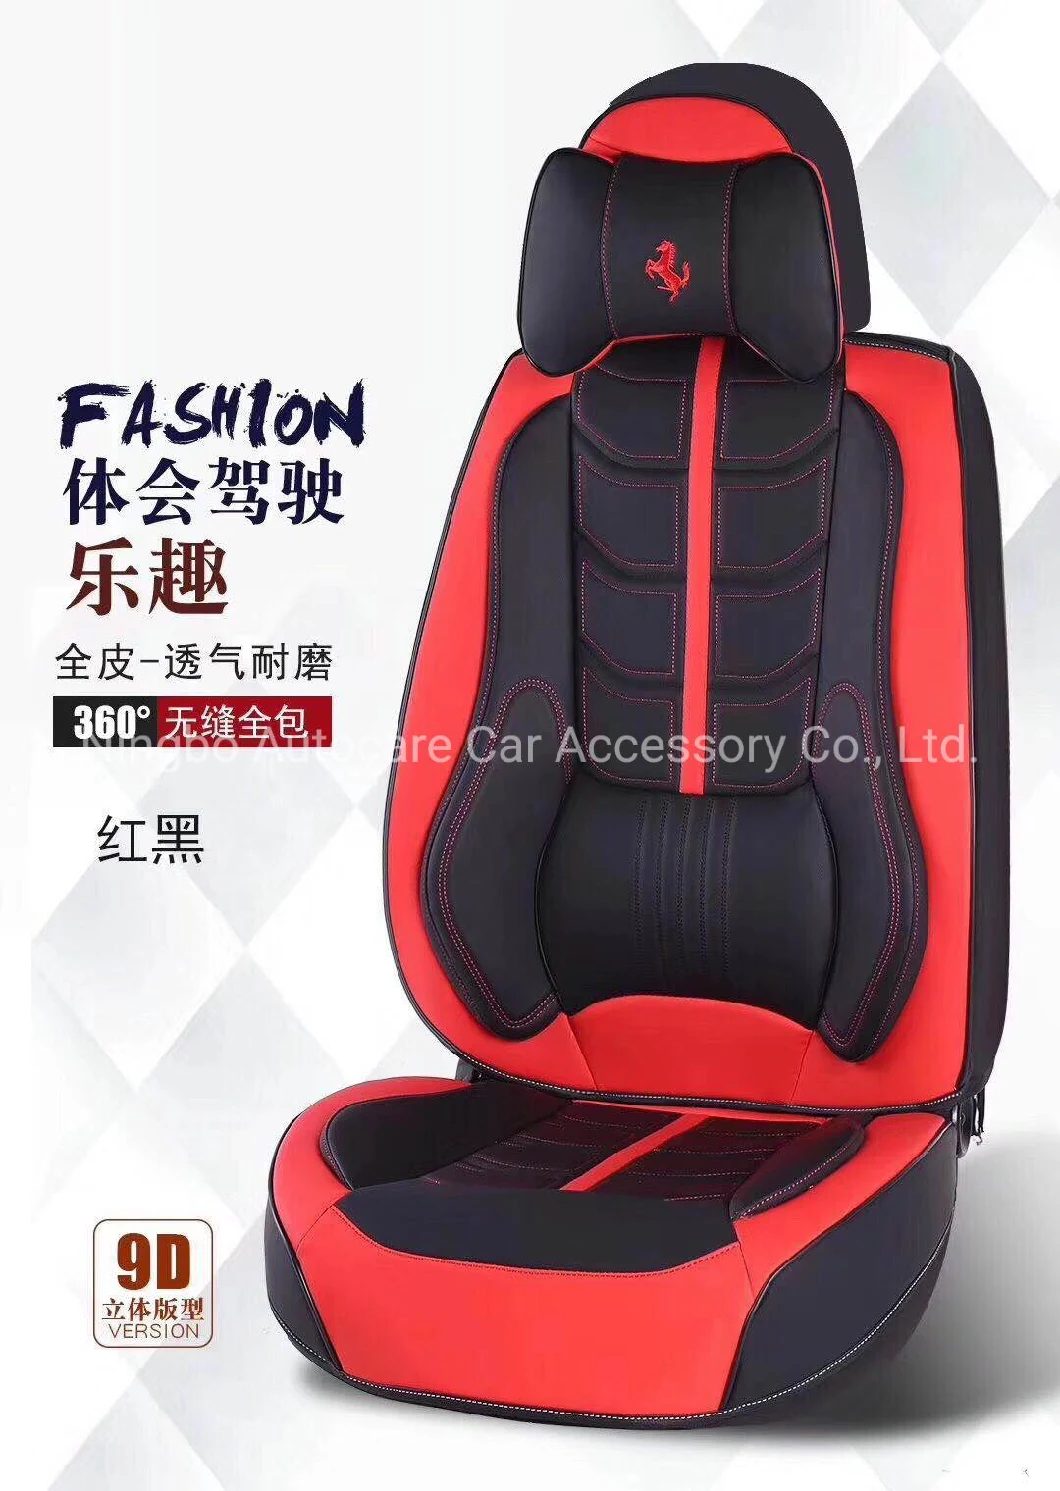 Car Accessories Car Decoration Car Seat Cover Universal High Quality Red Pure Leather Auto 9d Car Seat Cushion